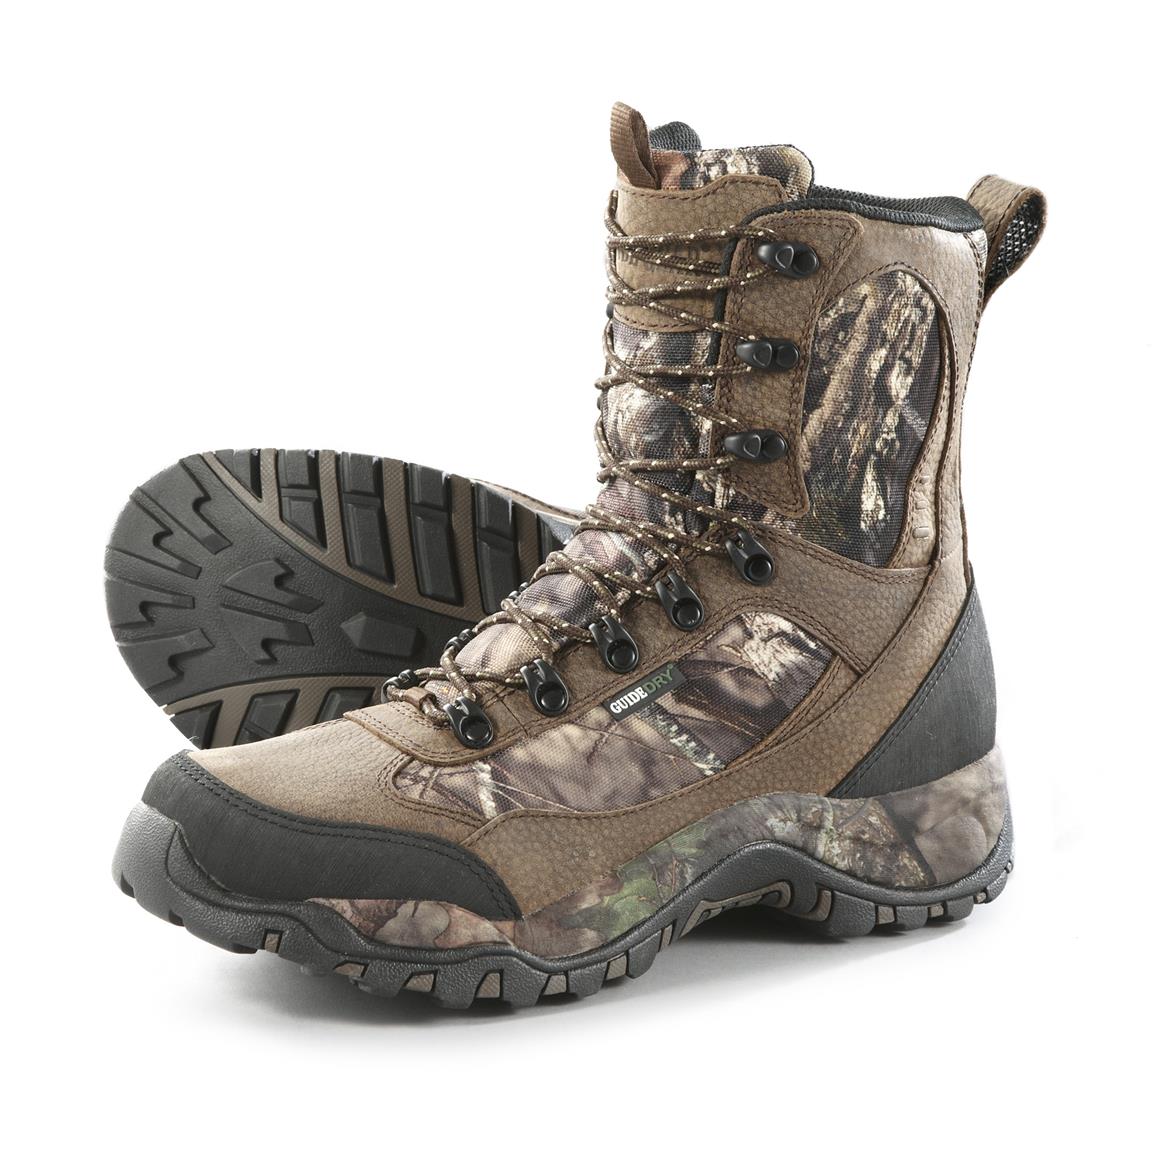 2 gram thinsulate hunting boots